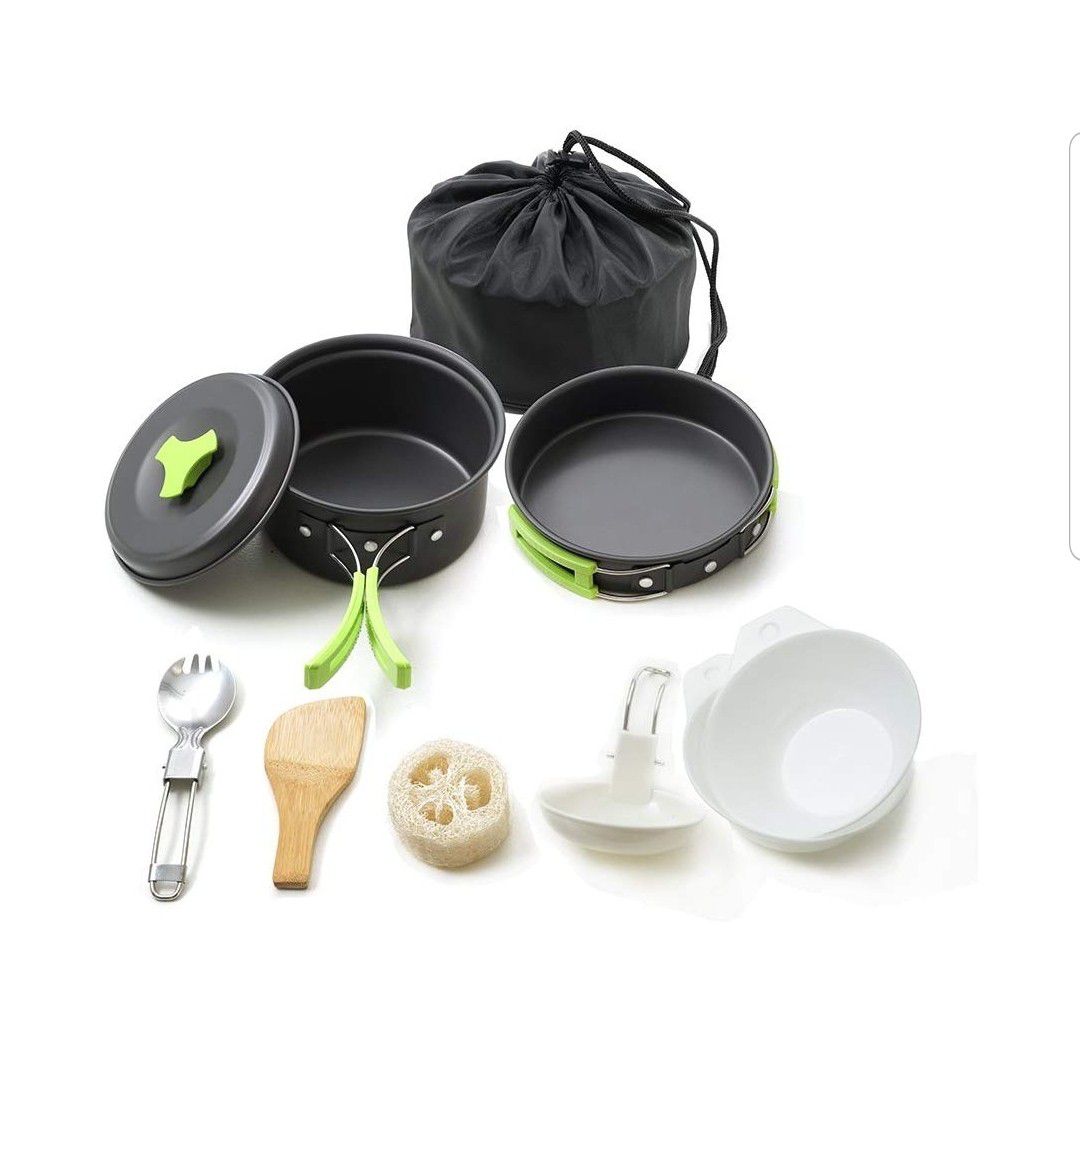 Honest Portable Camping cookware Mess kit Folding Cookset for Hiking Backpacking